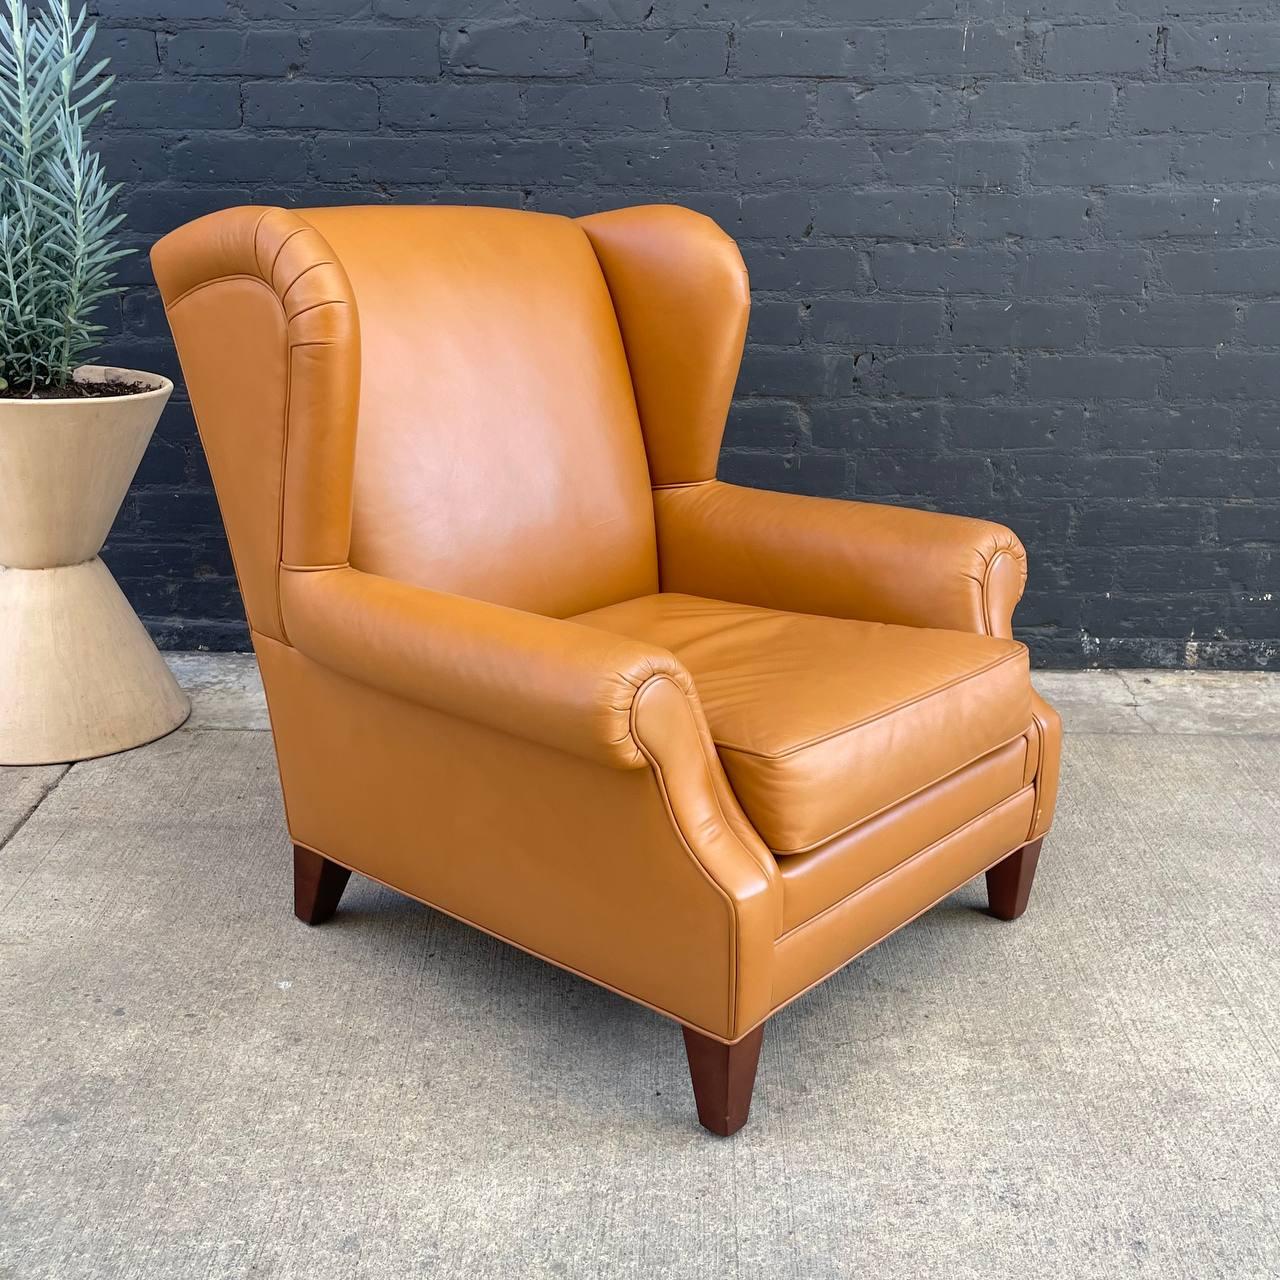 American Par of Vintage Leather English Style Wing Chairs For Sale